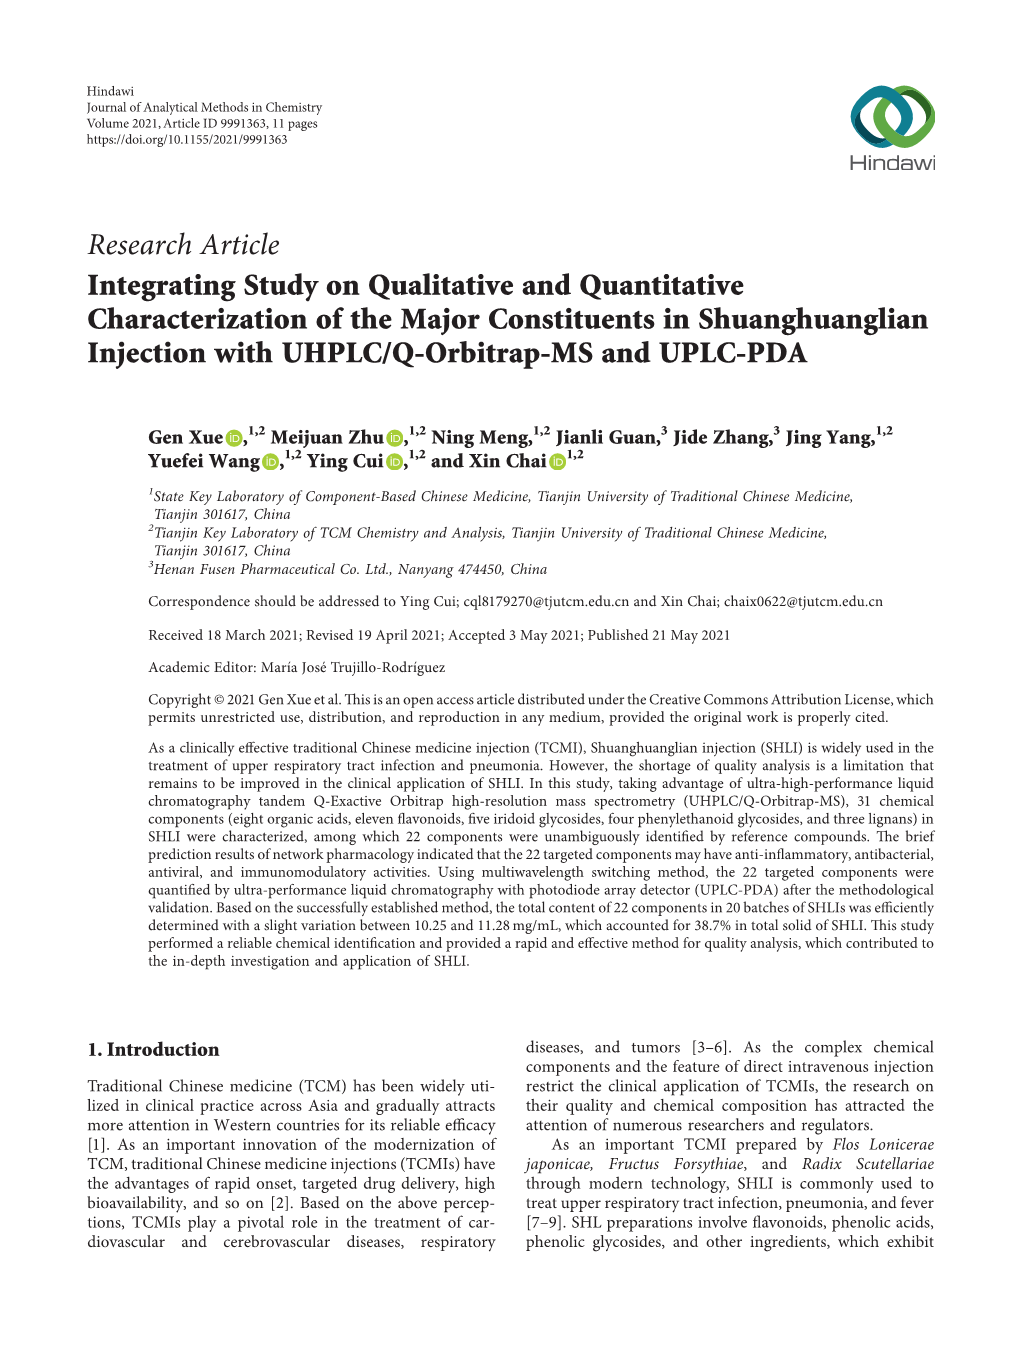 Integrating Study on Qualitative and Quantitative Characterization of the Major Constituents in Shuanghuanglian Injection with UHPLC/Q-Orbitrap-MS and UPLC-PDA